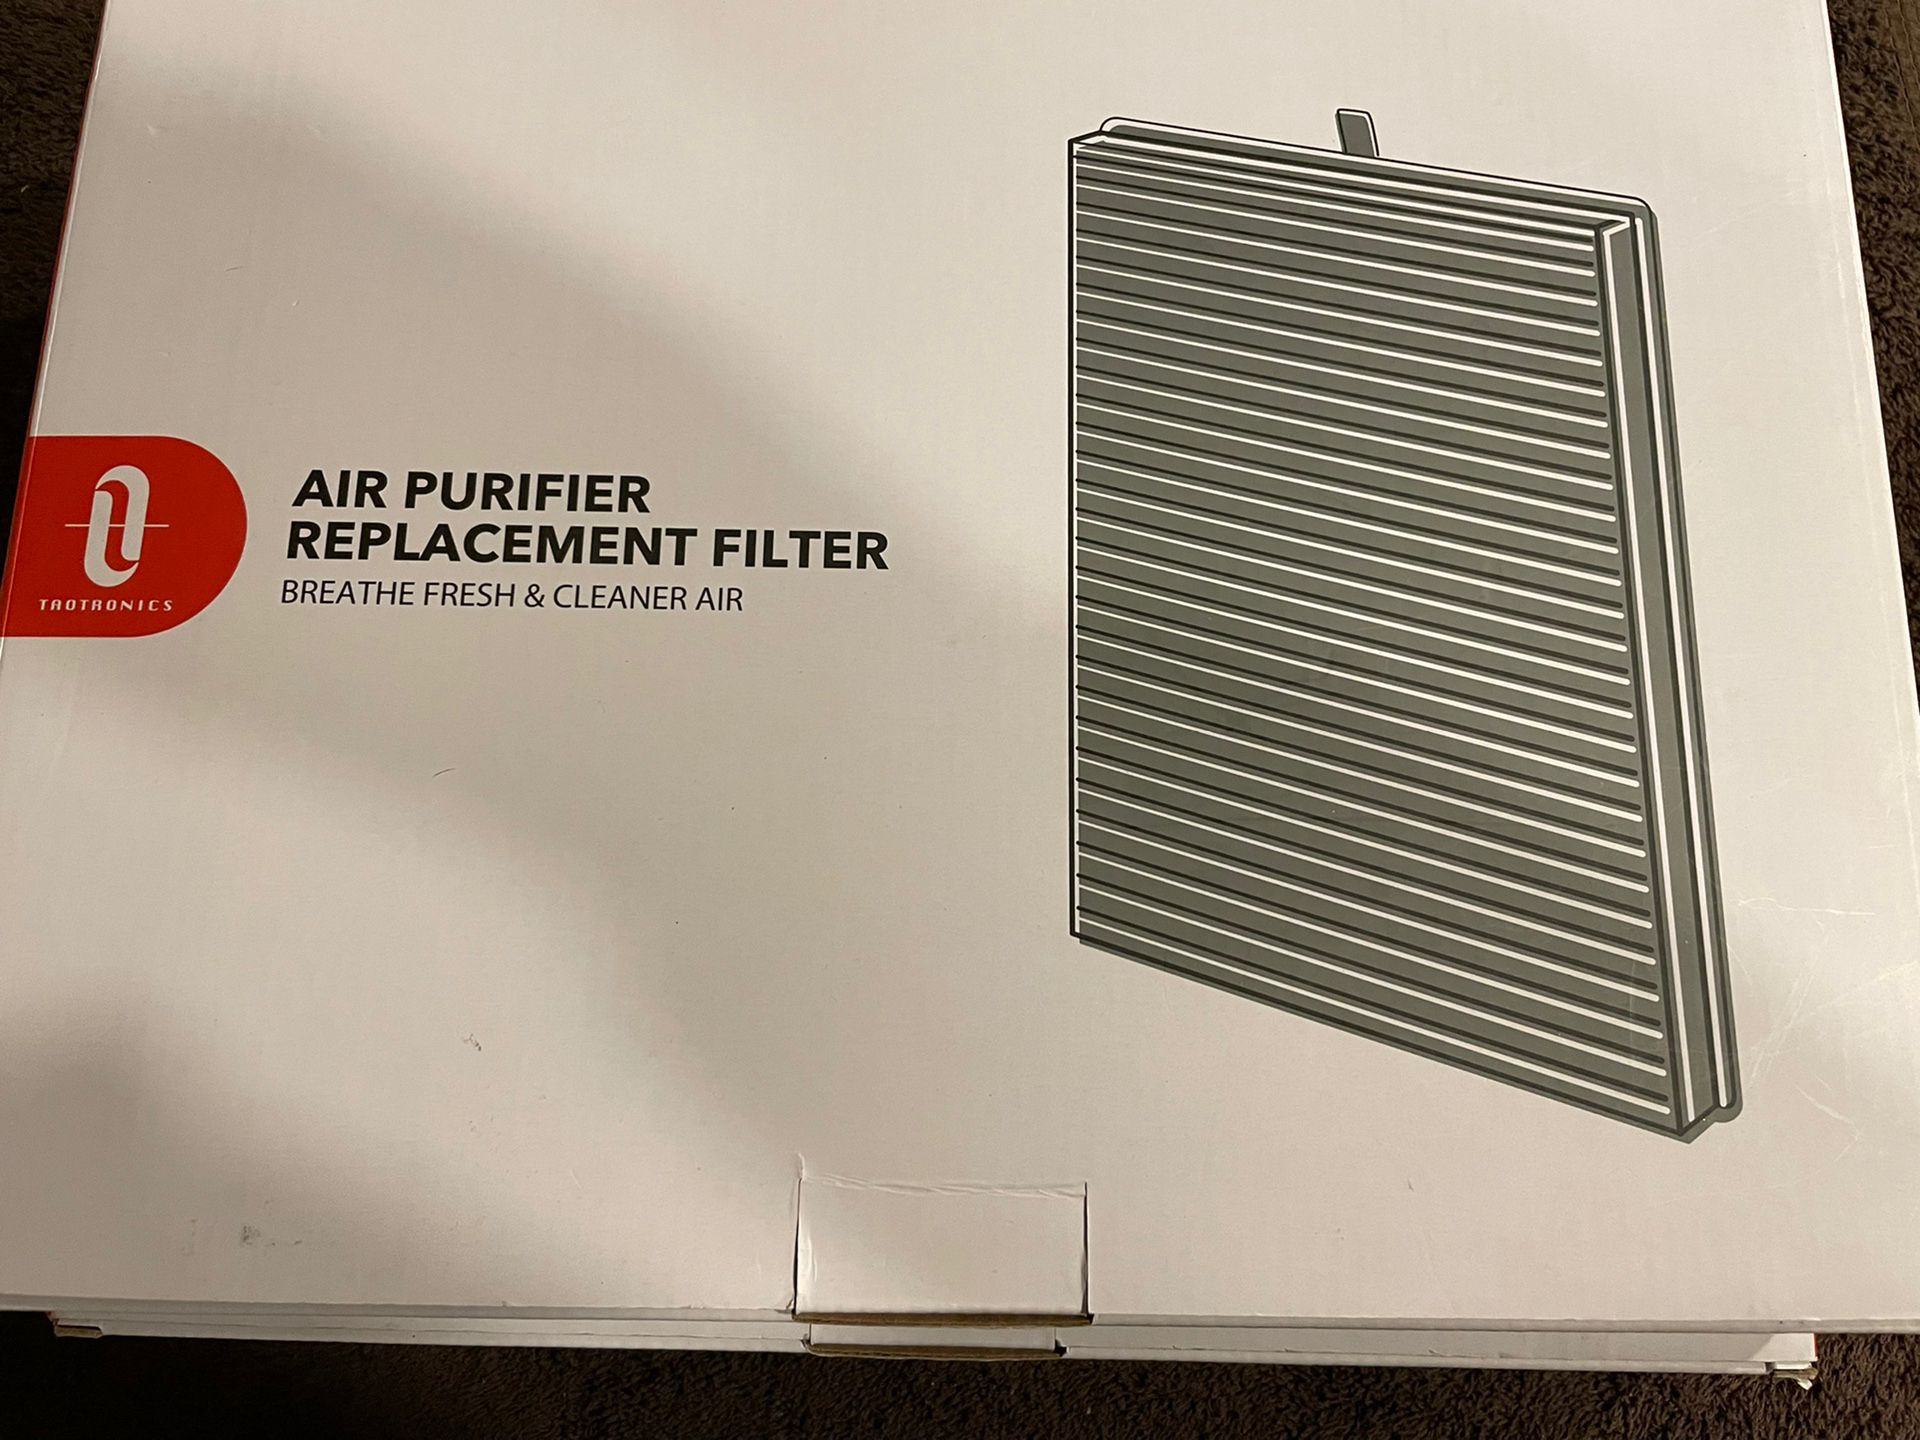 TaoTronics Air Purifier Replacement TT-AP007, 3-in-1 H13 HEPA Filter - retails for $29